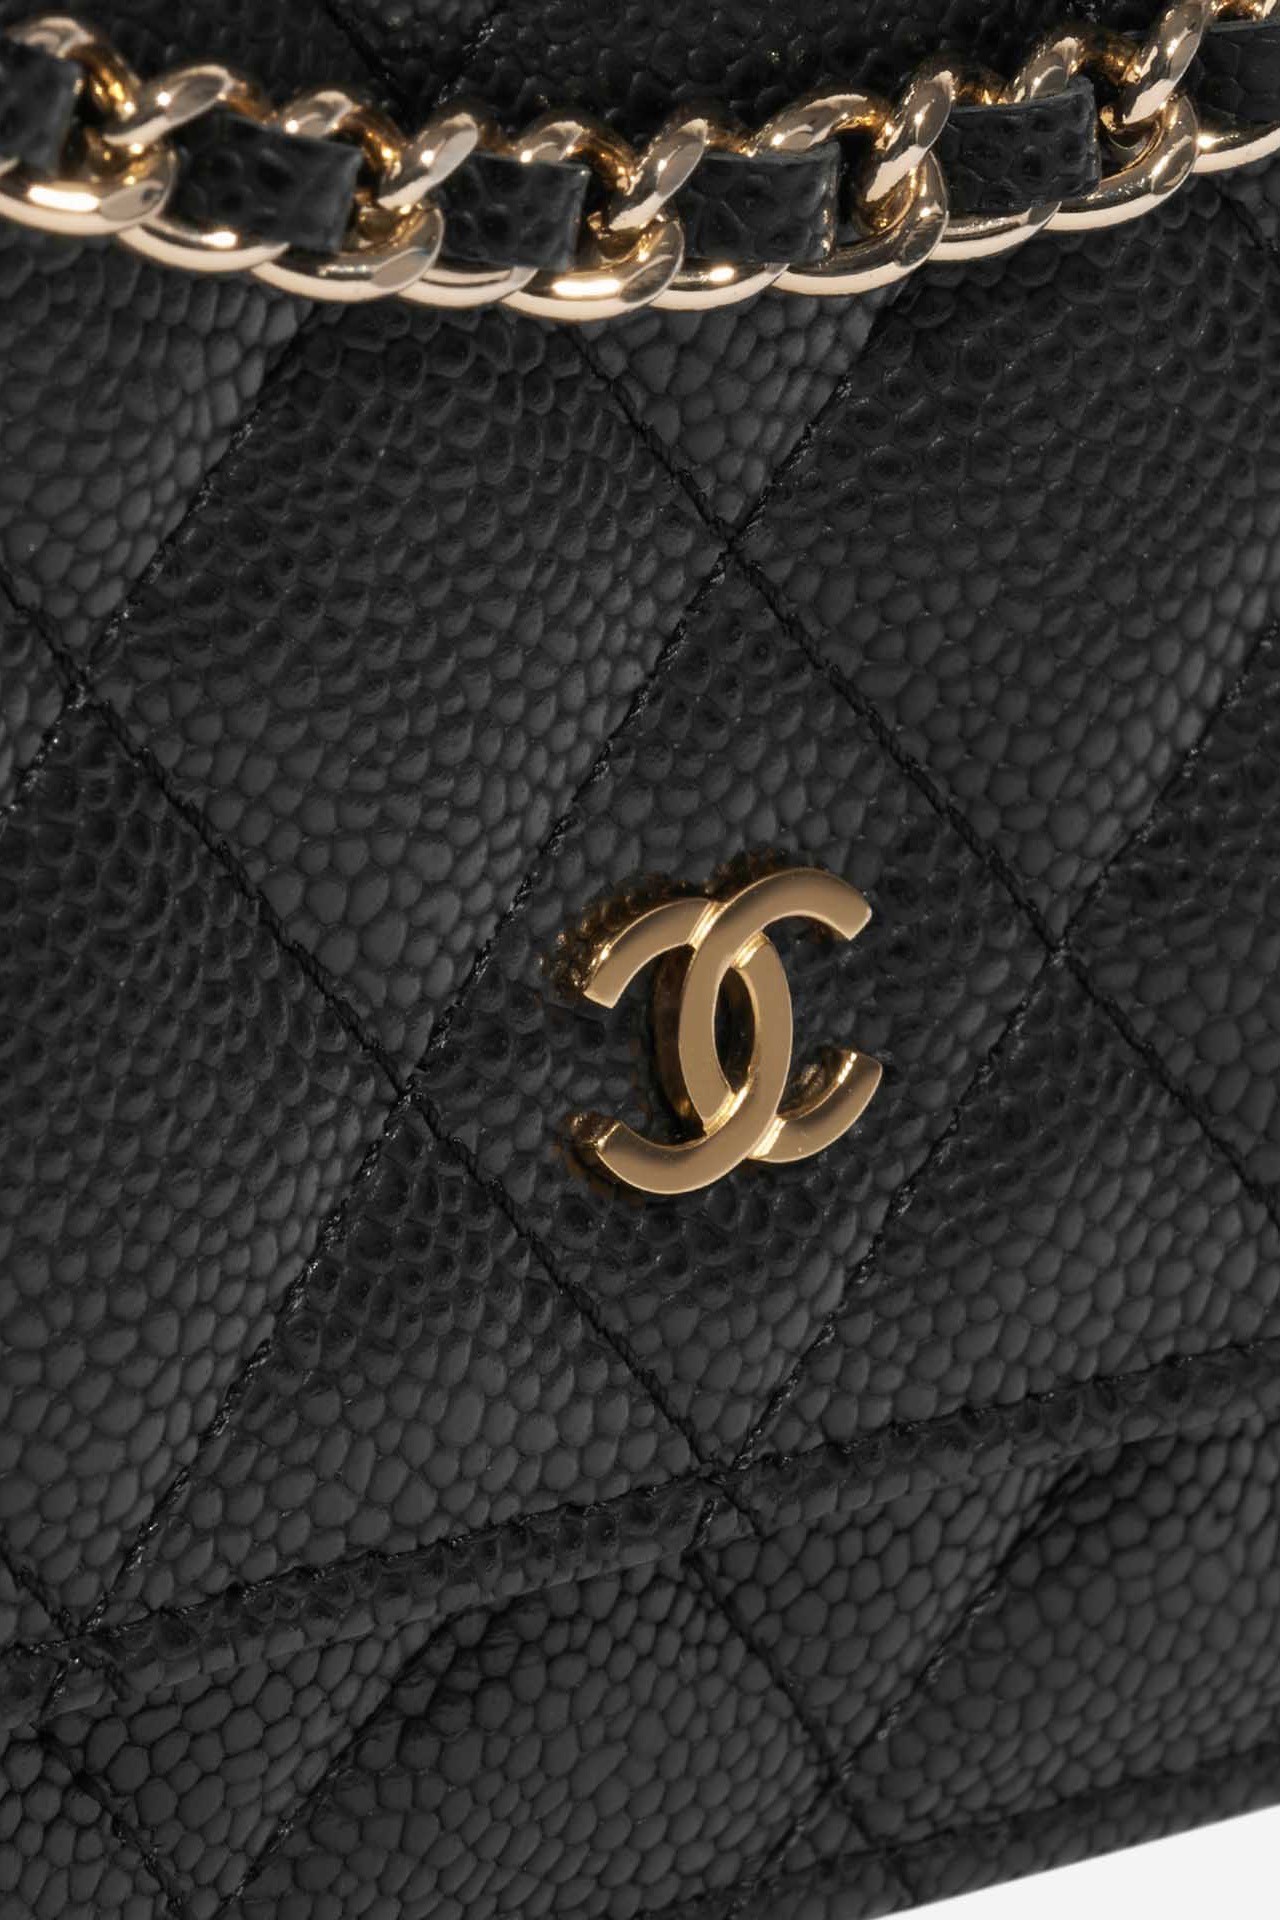 small chanel wallet bag leather